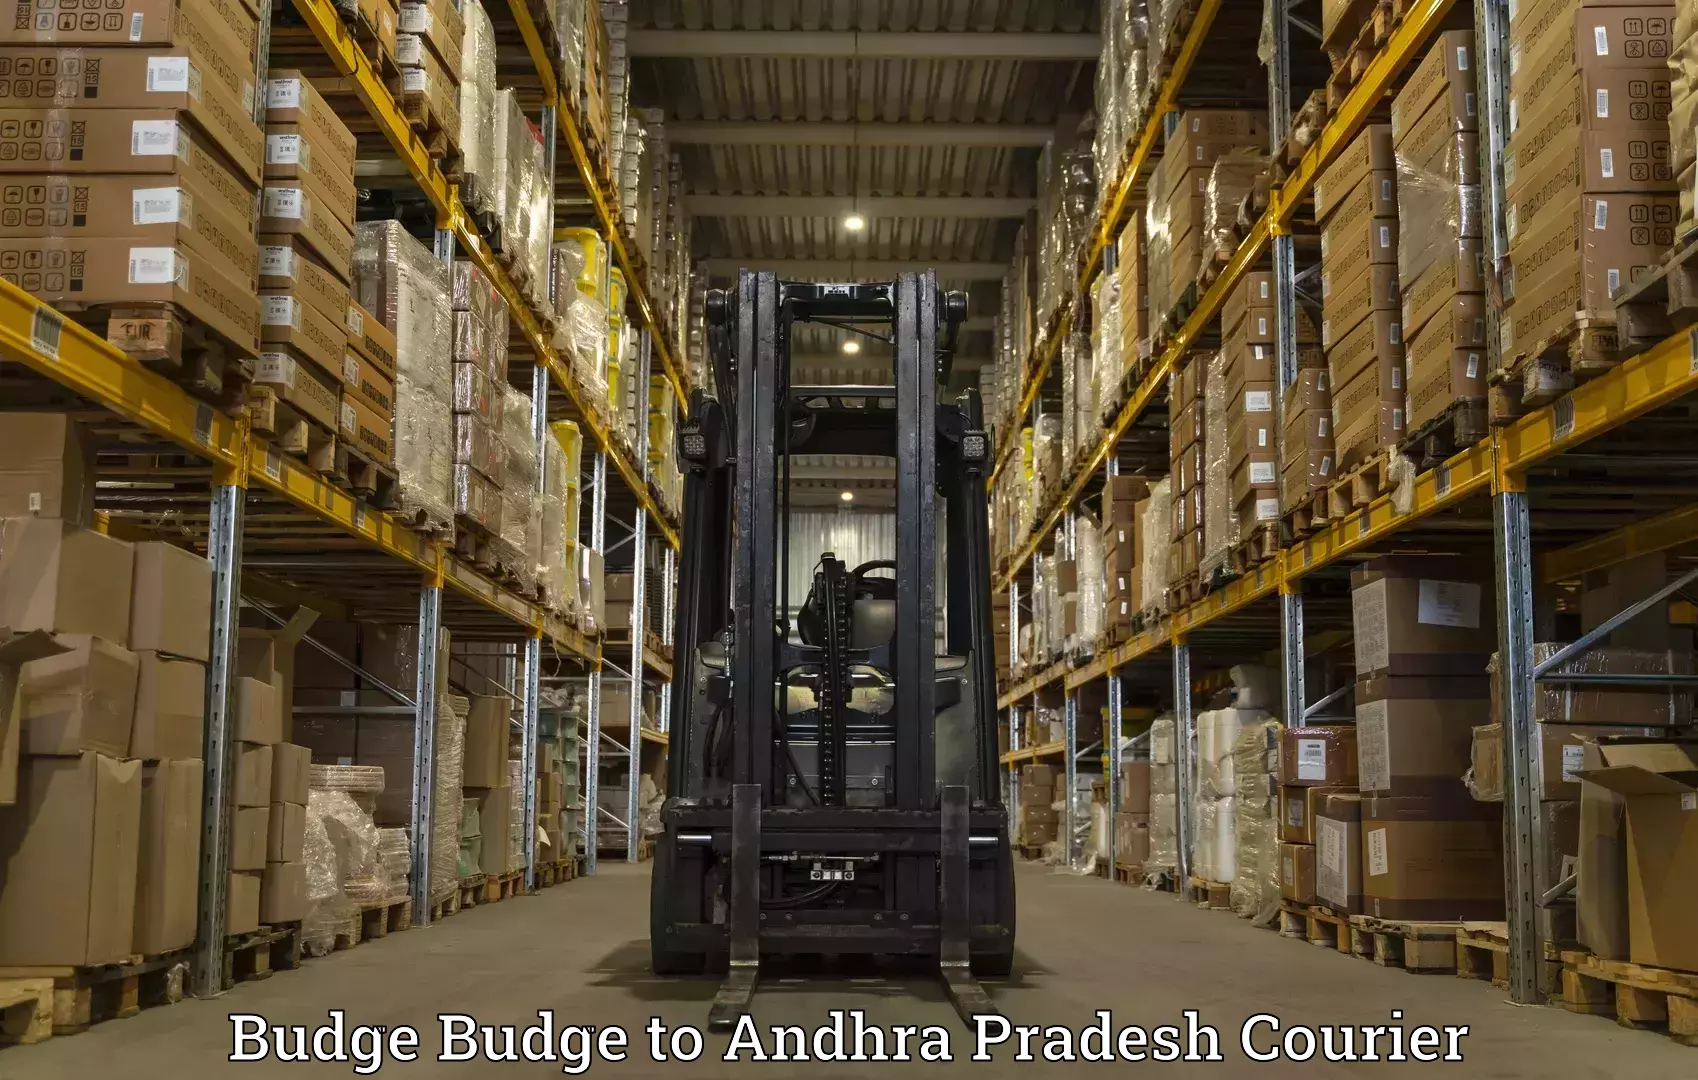 High-priority parcel service Budge Budge to Lingapalem